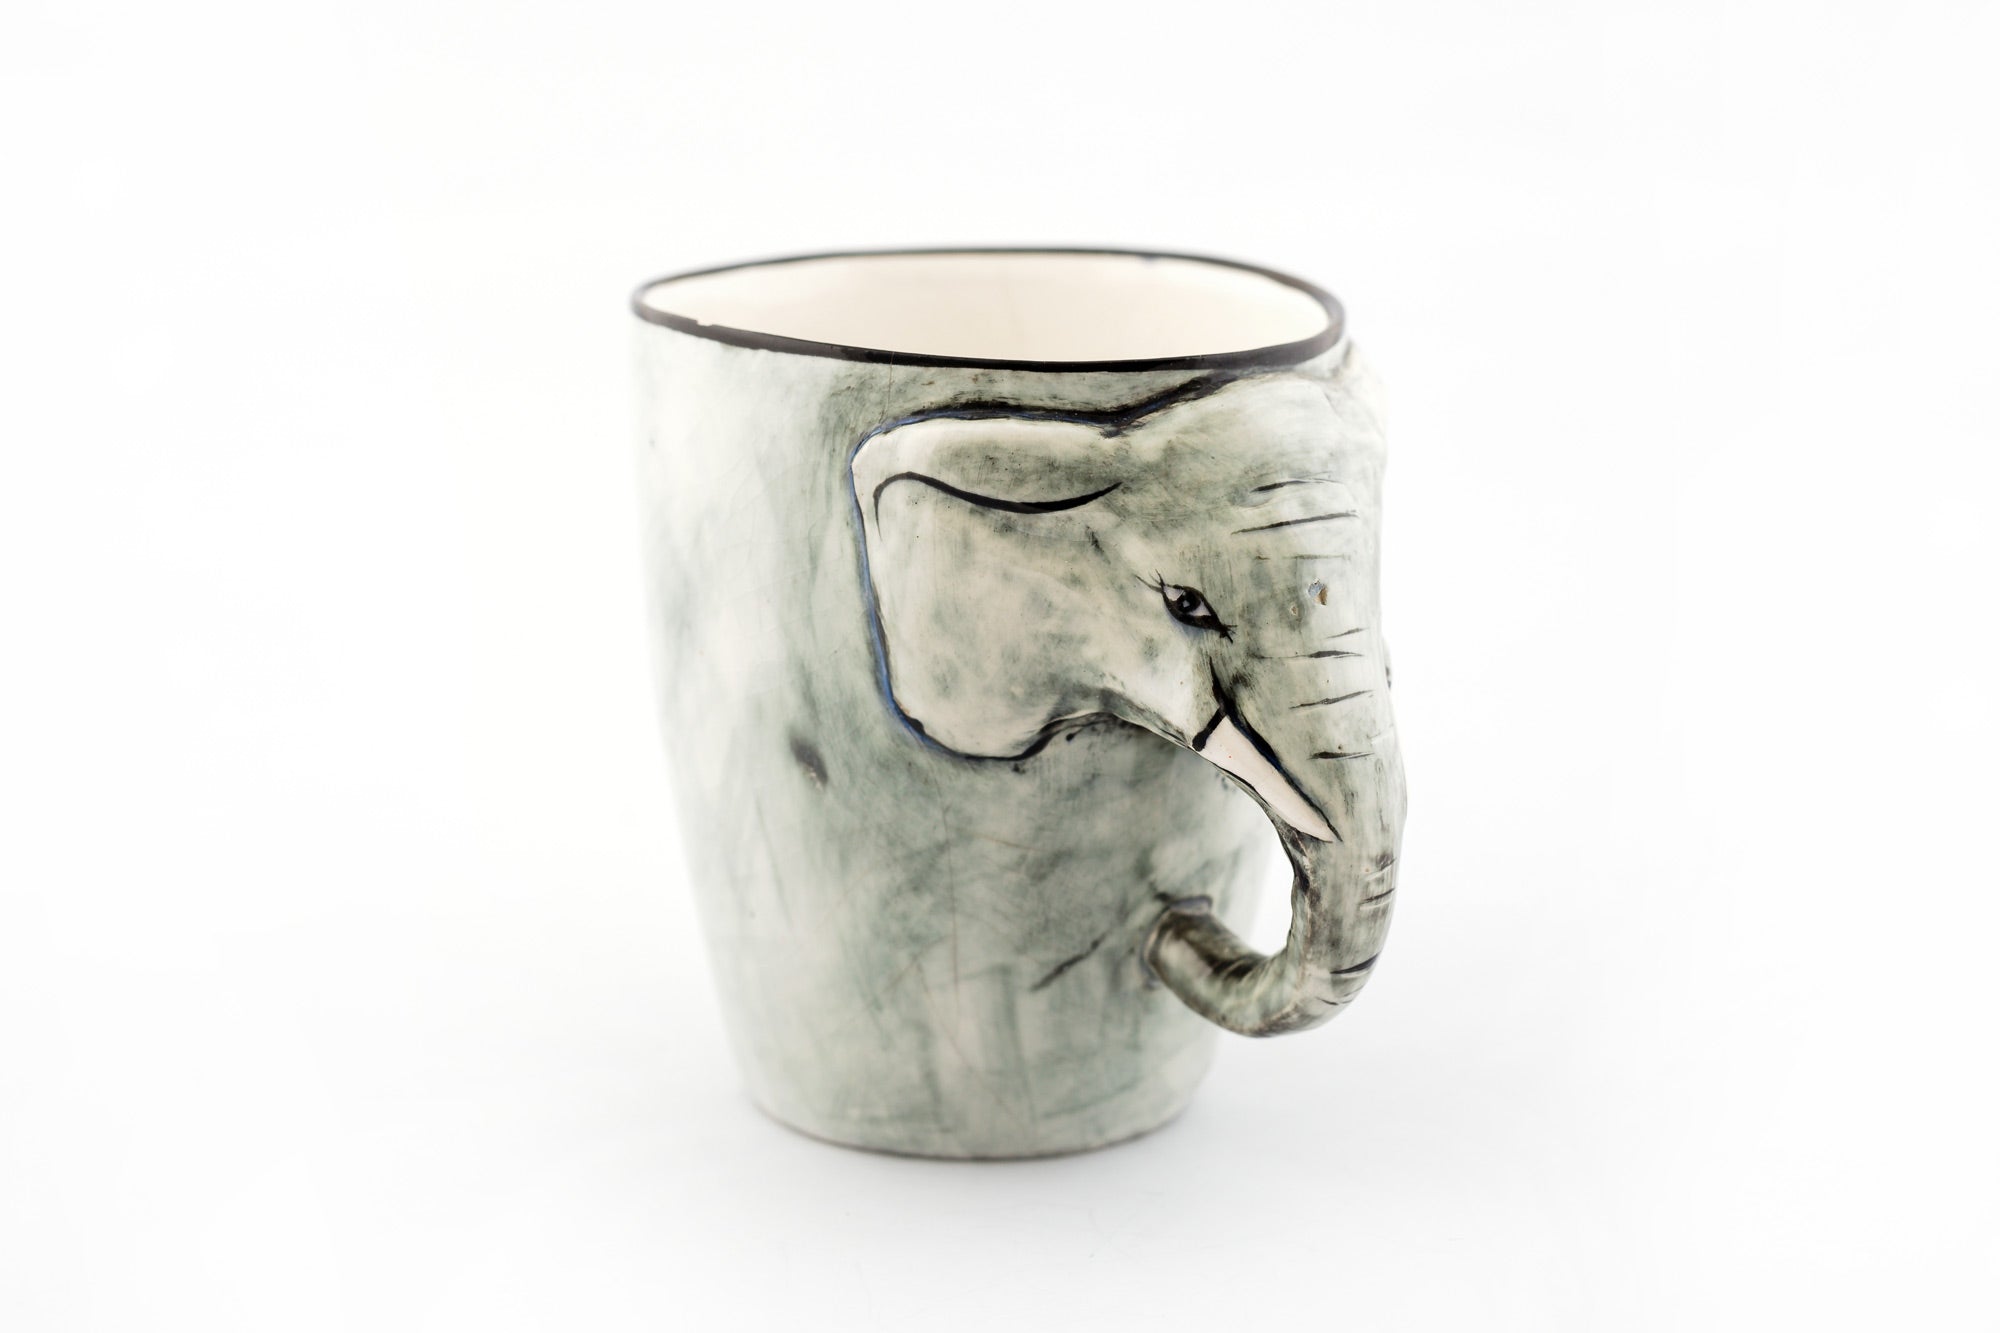 Ceramic mug painted in grey with an elephant head on the side and his truck is the handle! Whimsy and fun.